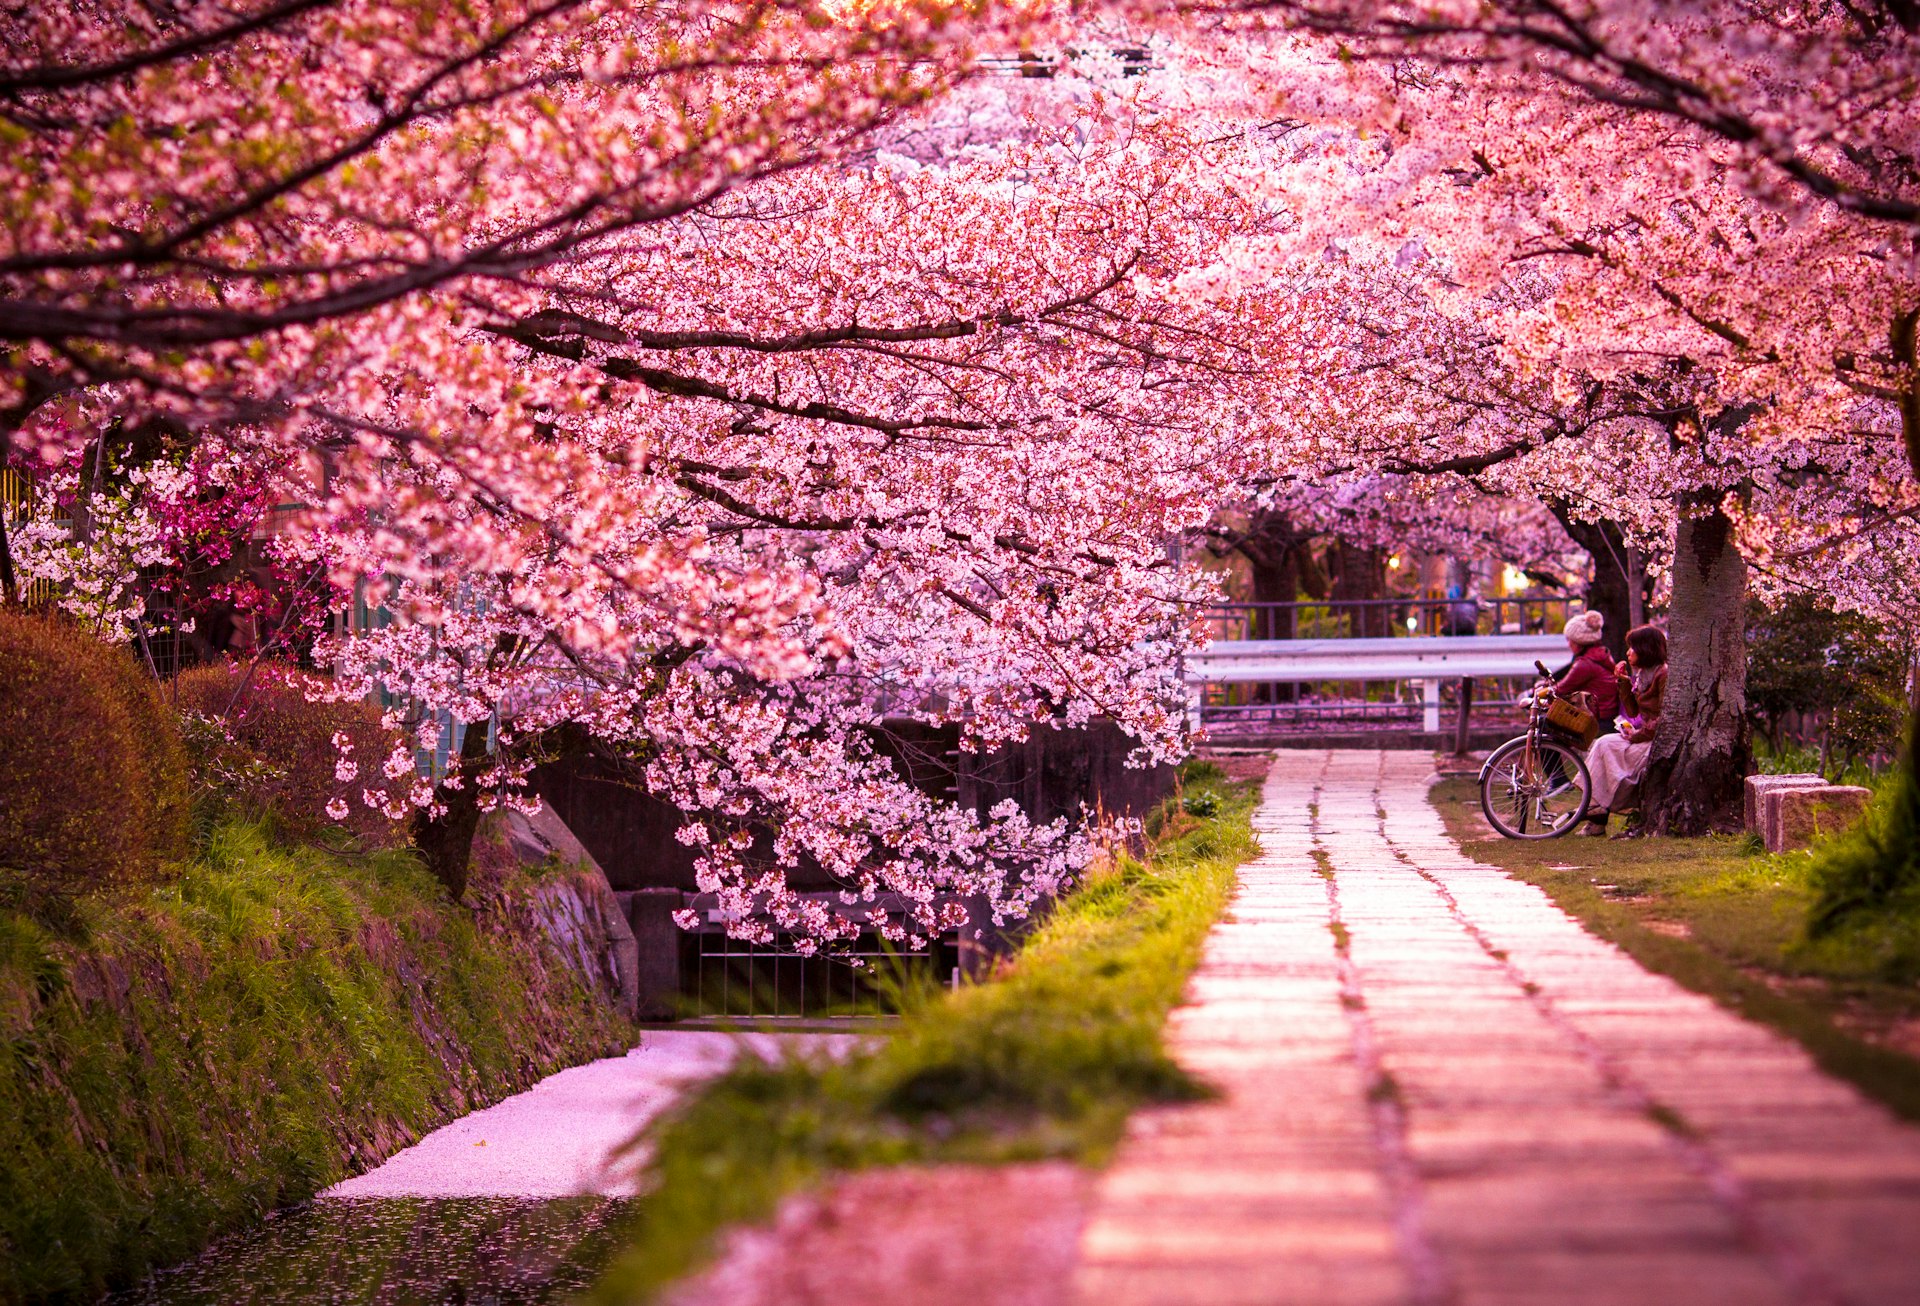 Pathway in Kyoto, Japan